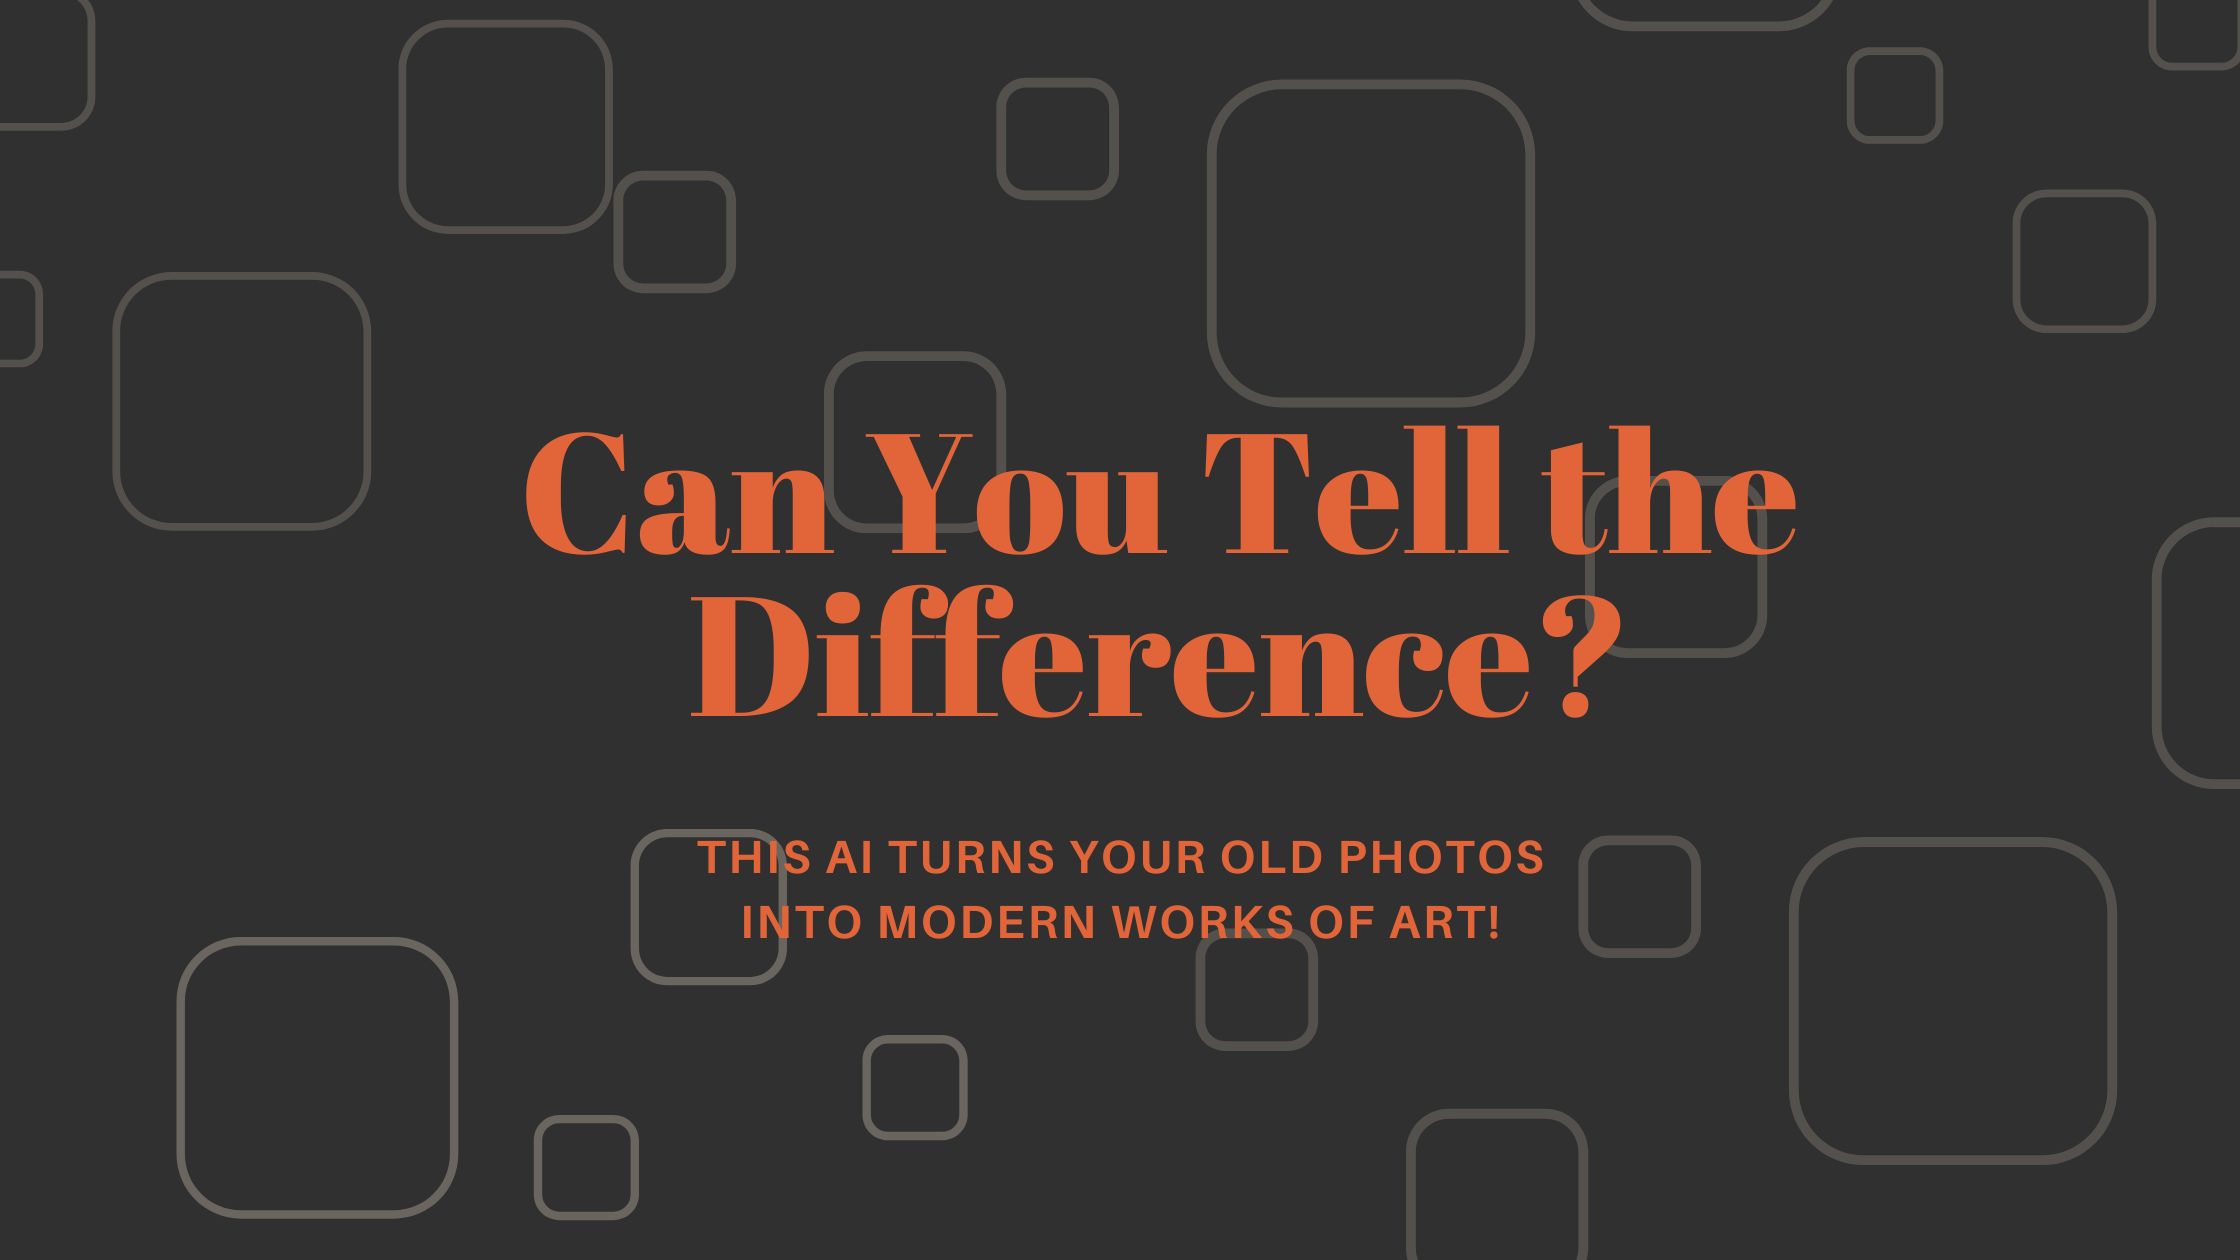 Can You Tell the Difference? This AI Turns Your Old Photos into Modern Works of Art!